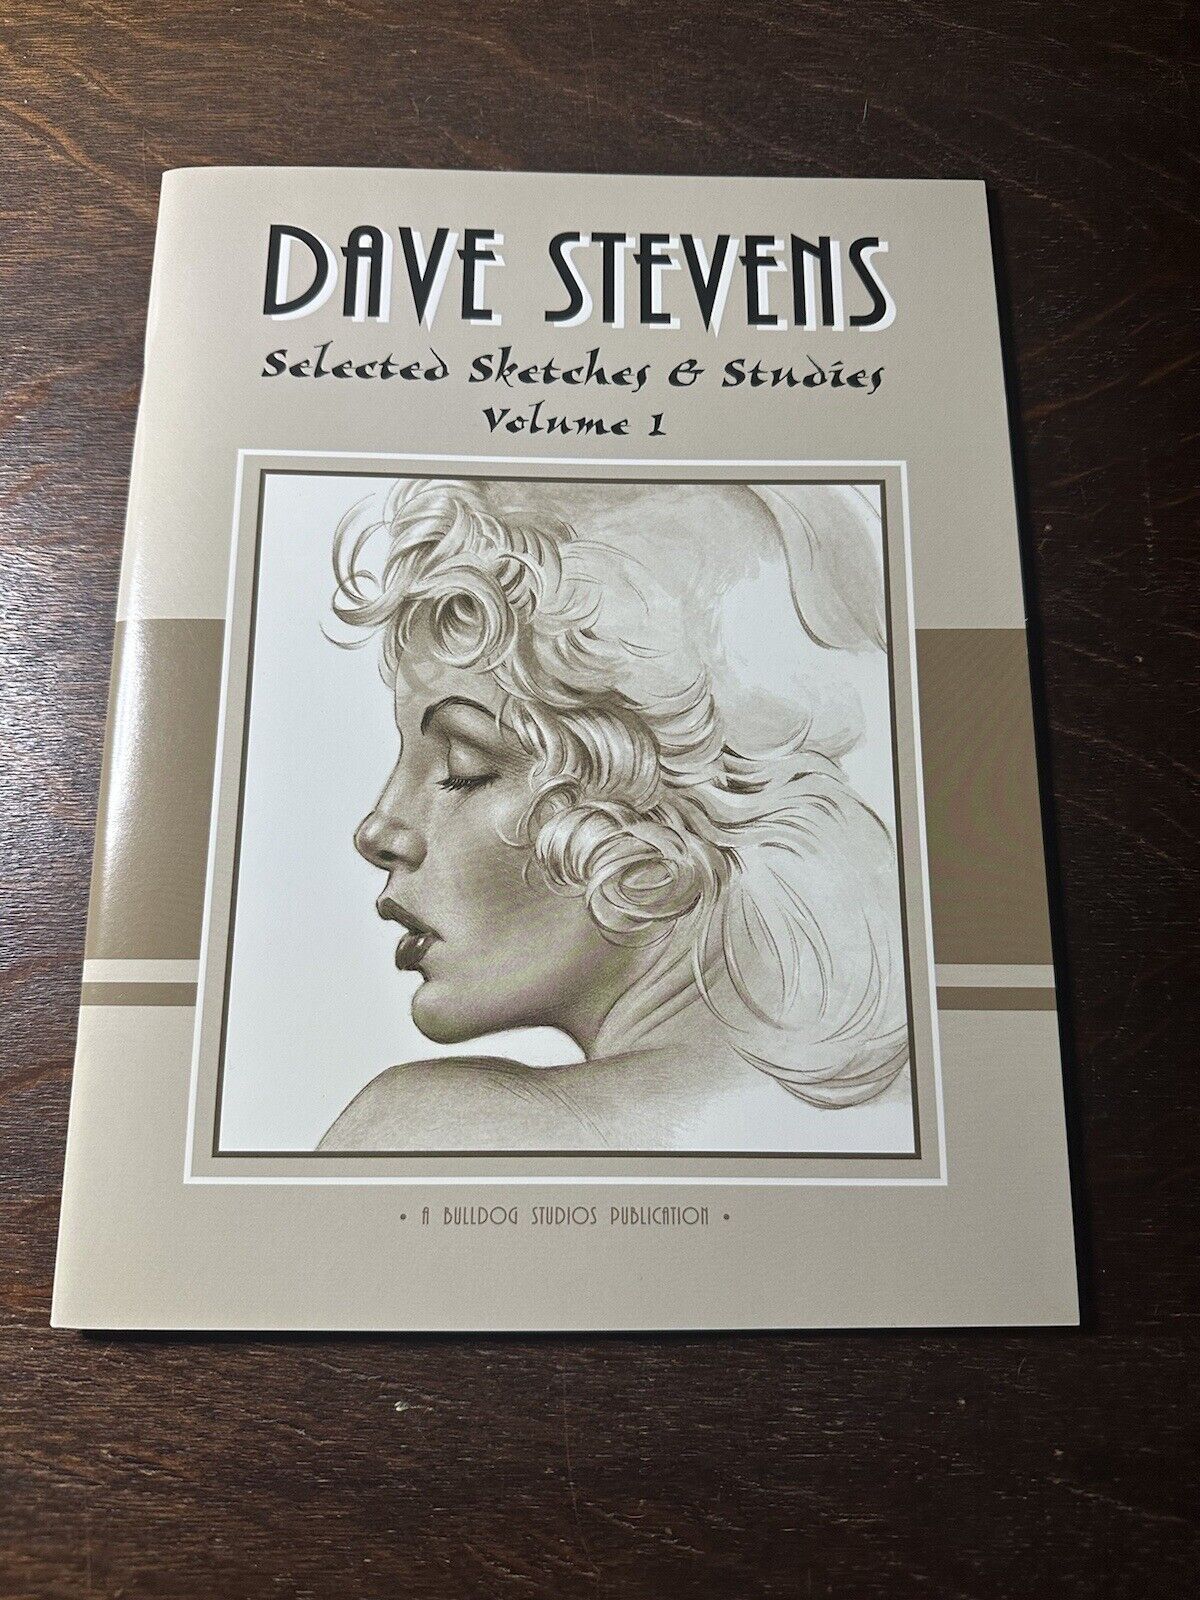 DAVE STEVENS Sketches & Studies VOL 1 Signed(Personalized)